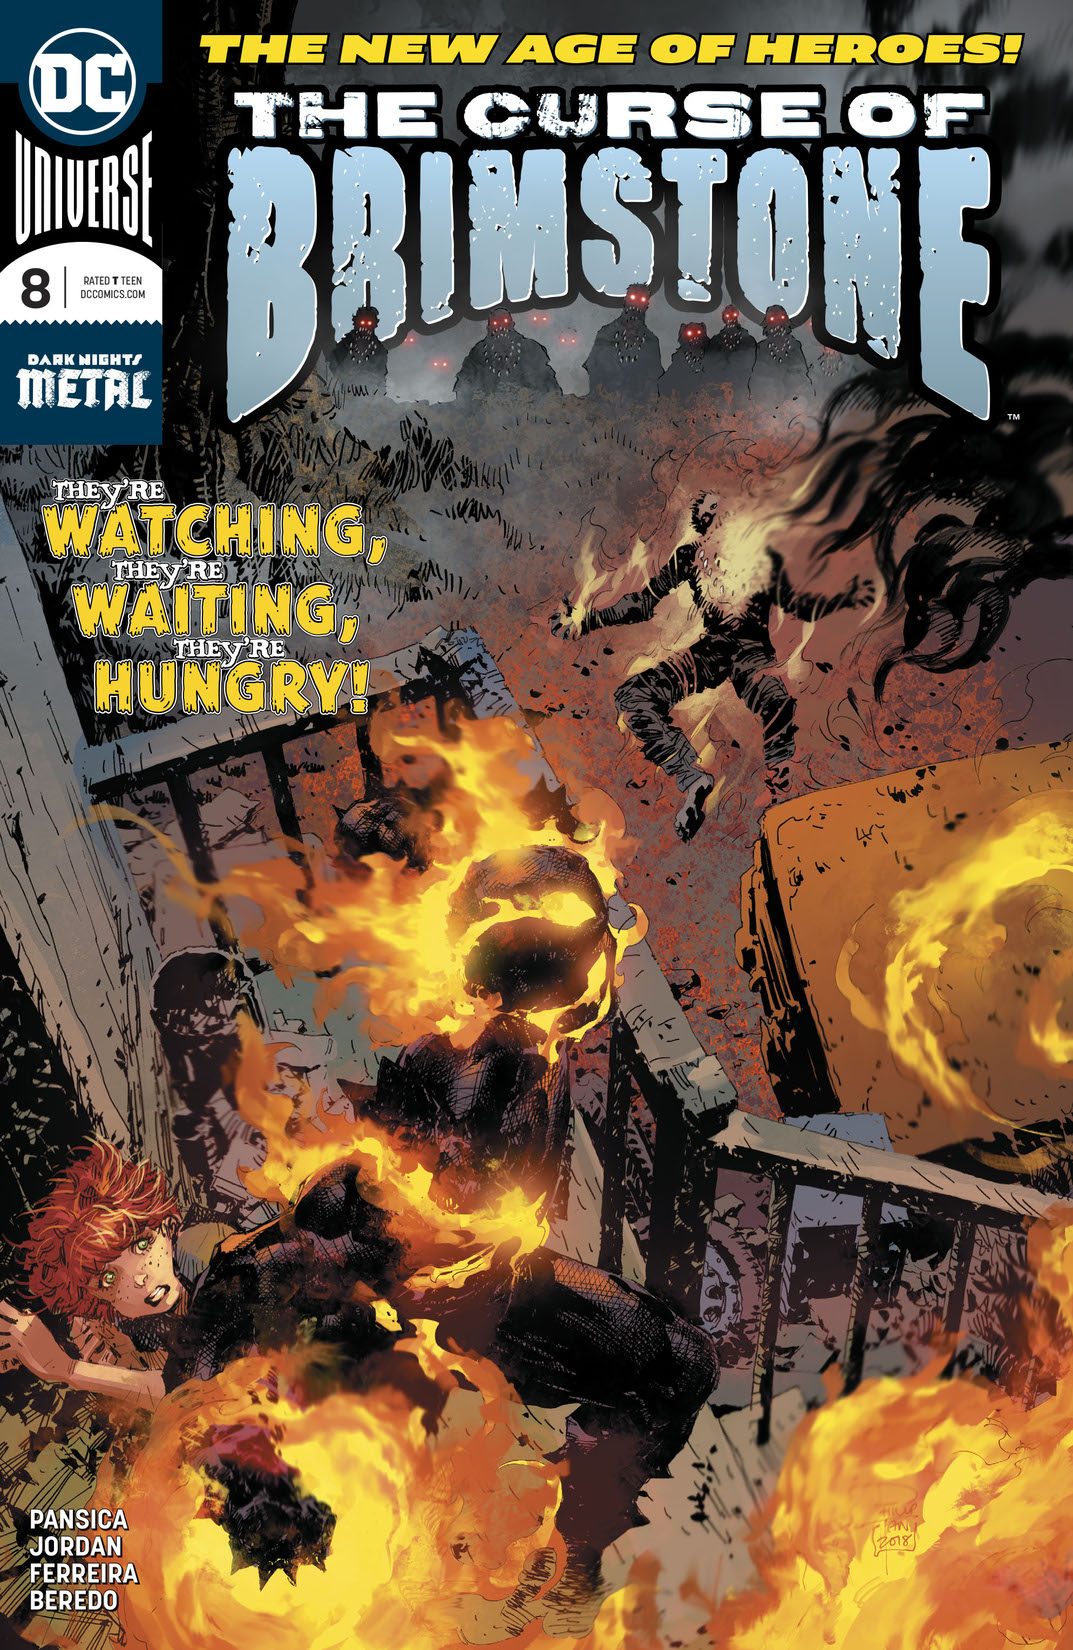 The Curse of Brimstone #8 preview images